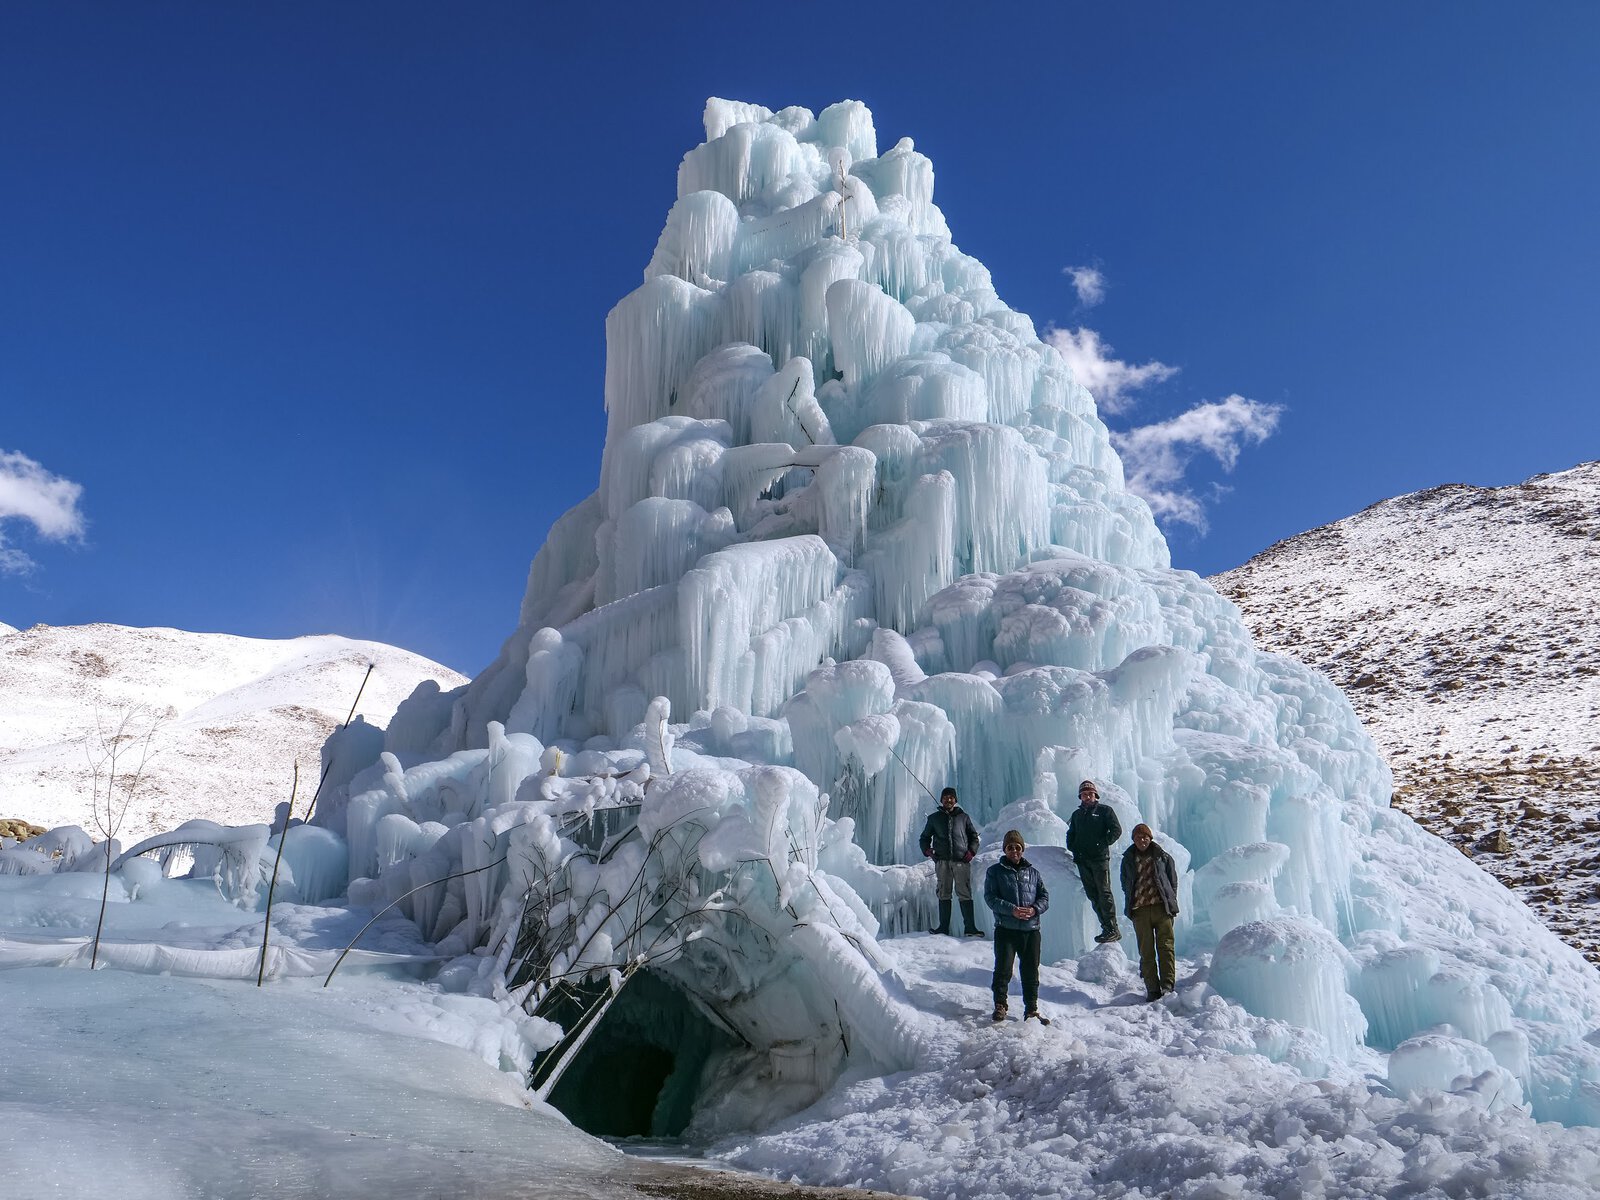 People stand in front if an ice stupa.